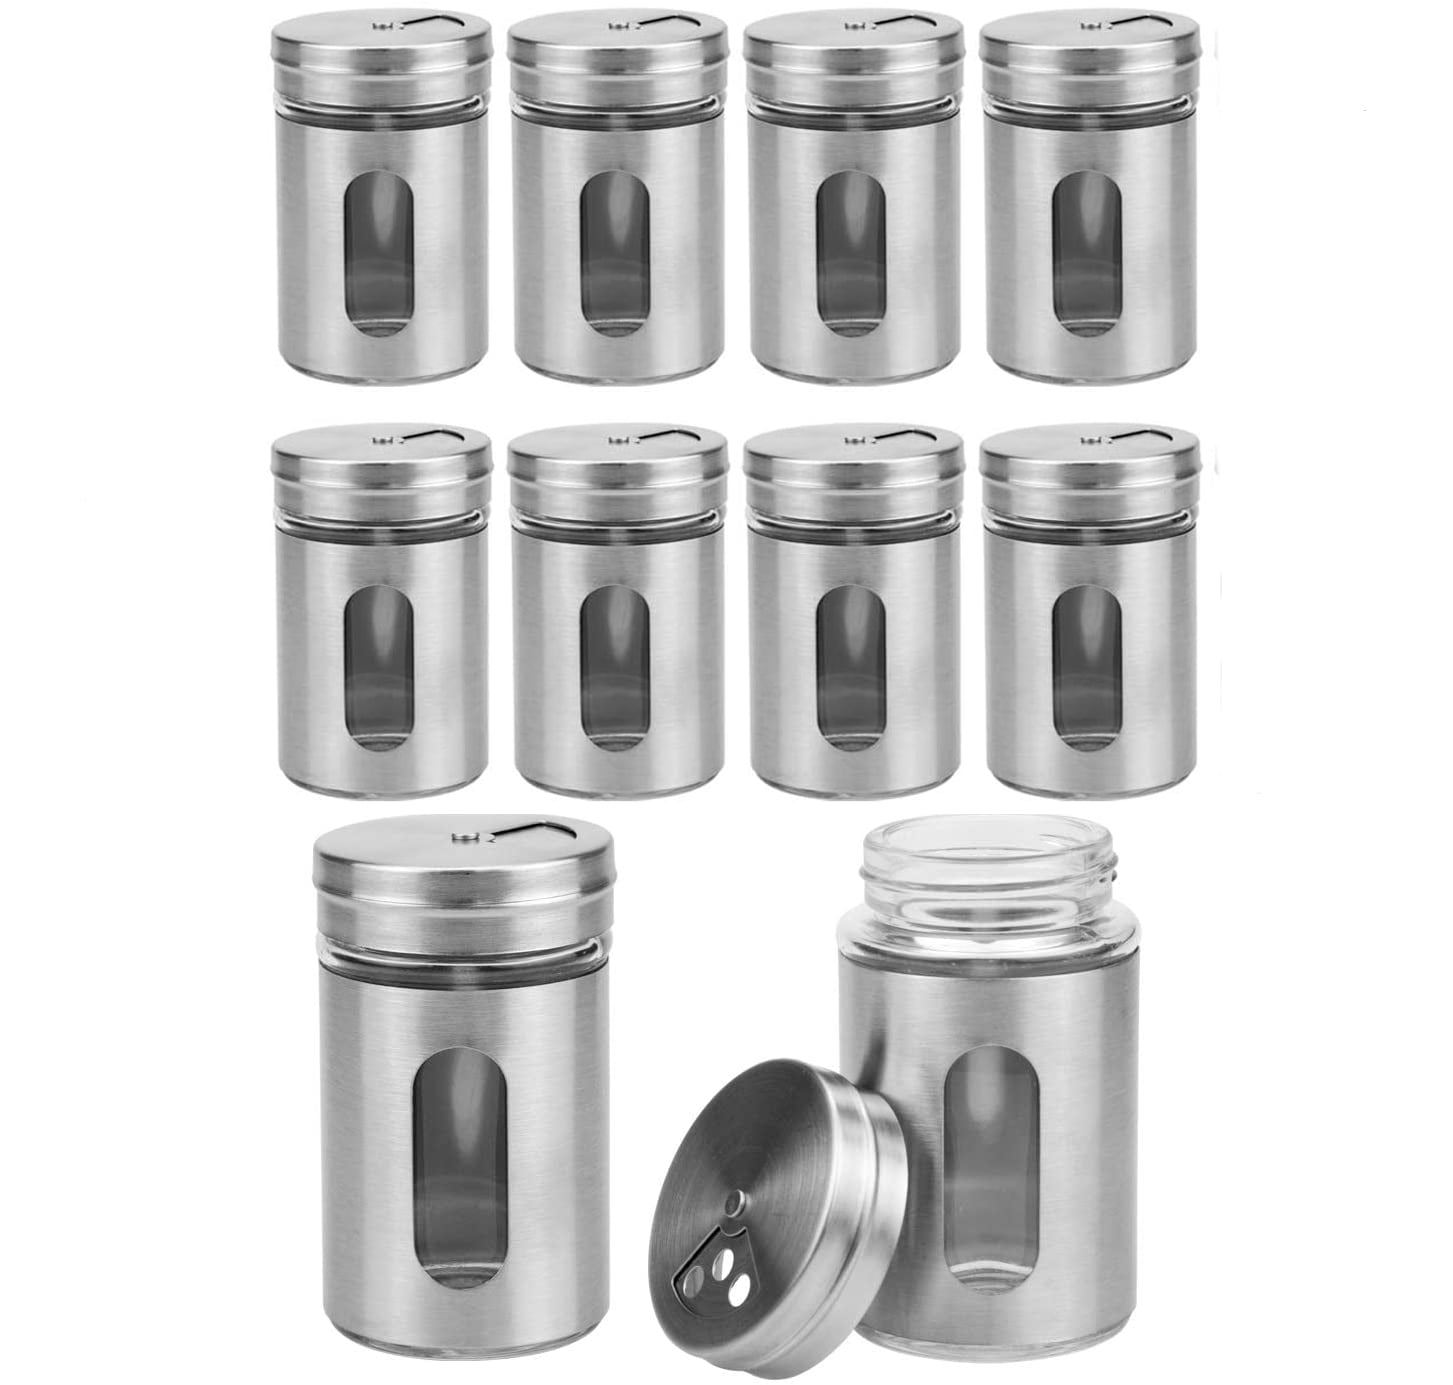 10 Pieces Spice Shaker Stainless Steel Storage Jars, Spice Jars with ...